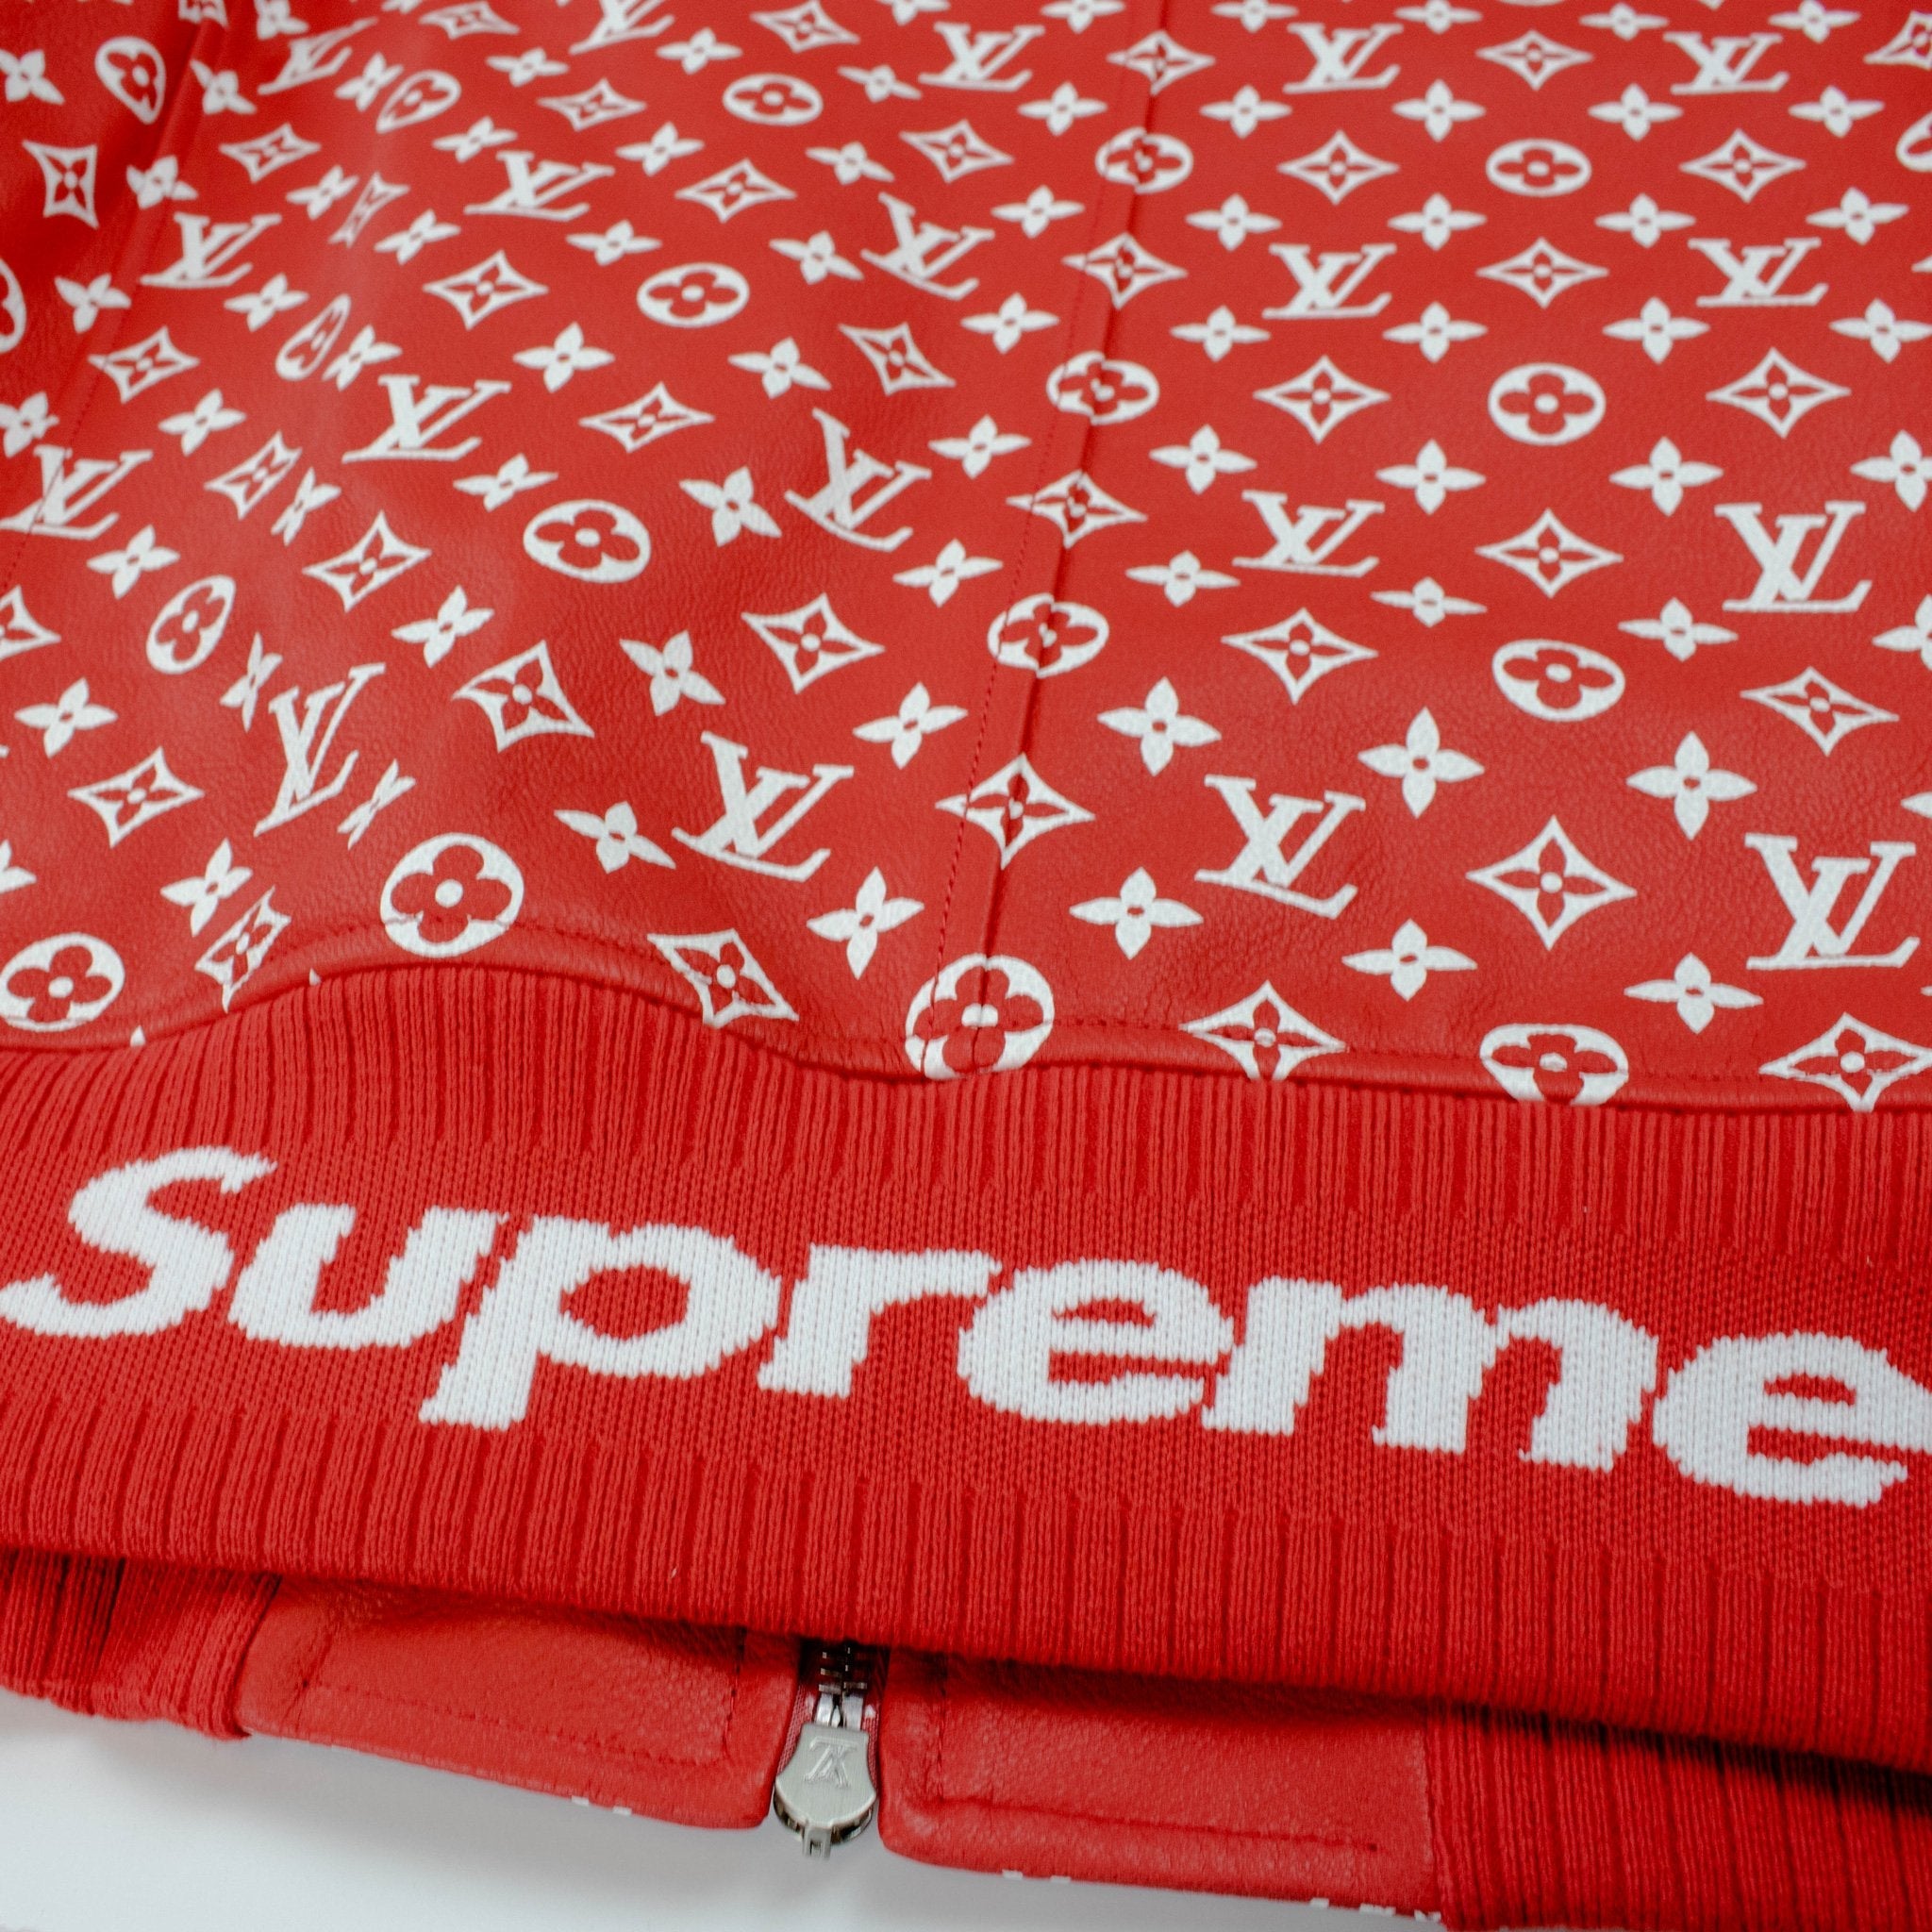 Louis Vuitton X Supreme Louis Vuitton X Supreme Monogram Scarf Available  For Immediate Sale At Sotheby's